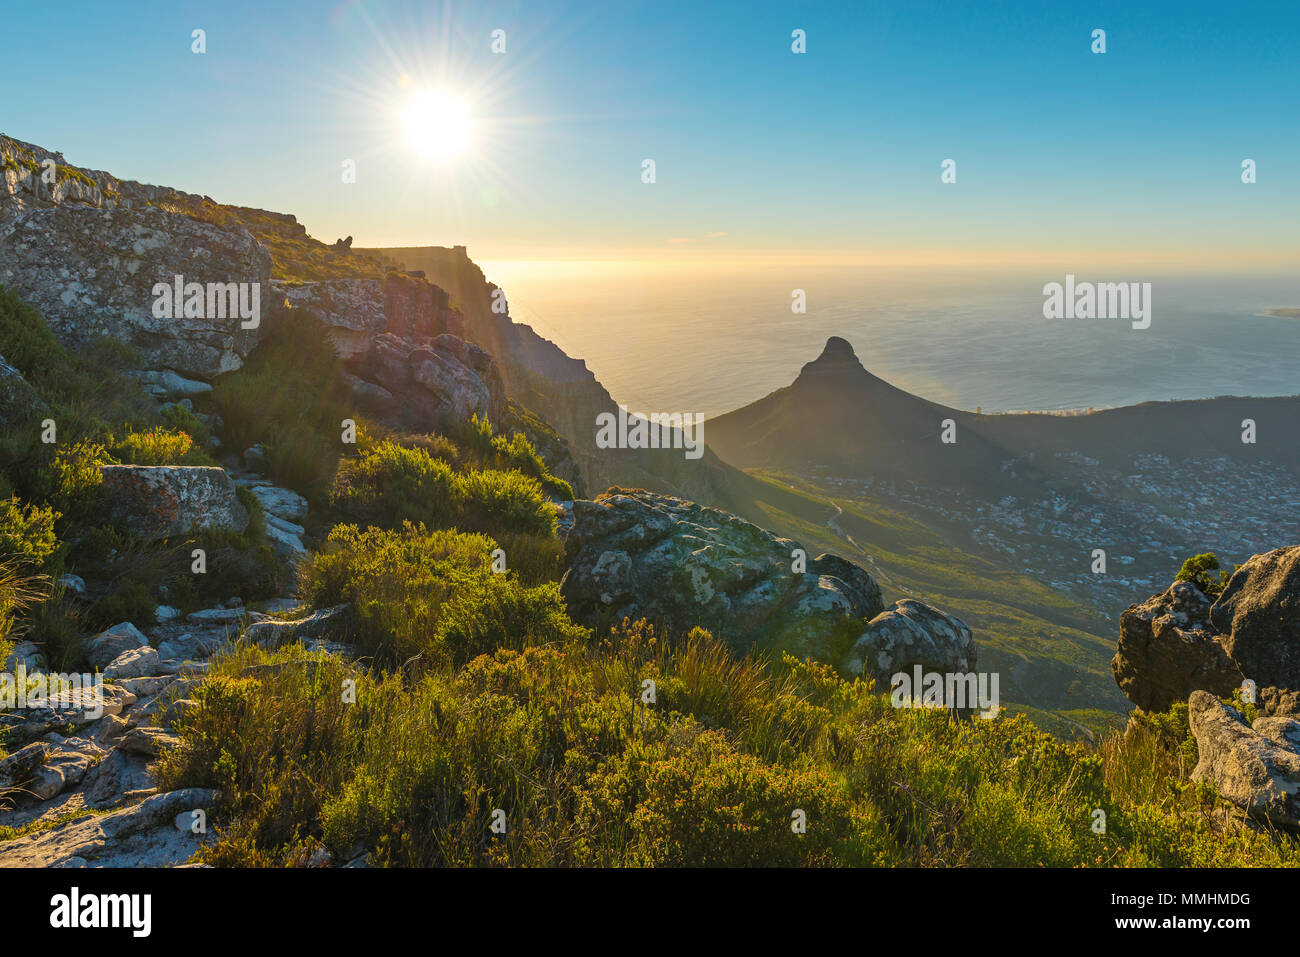 Sunset landscape with sunbeam of Cape Town city and Lions Head mountain peak at sunset seen from the Table Mountain national park, South Africa. Stock Photo